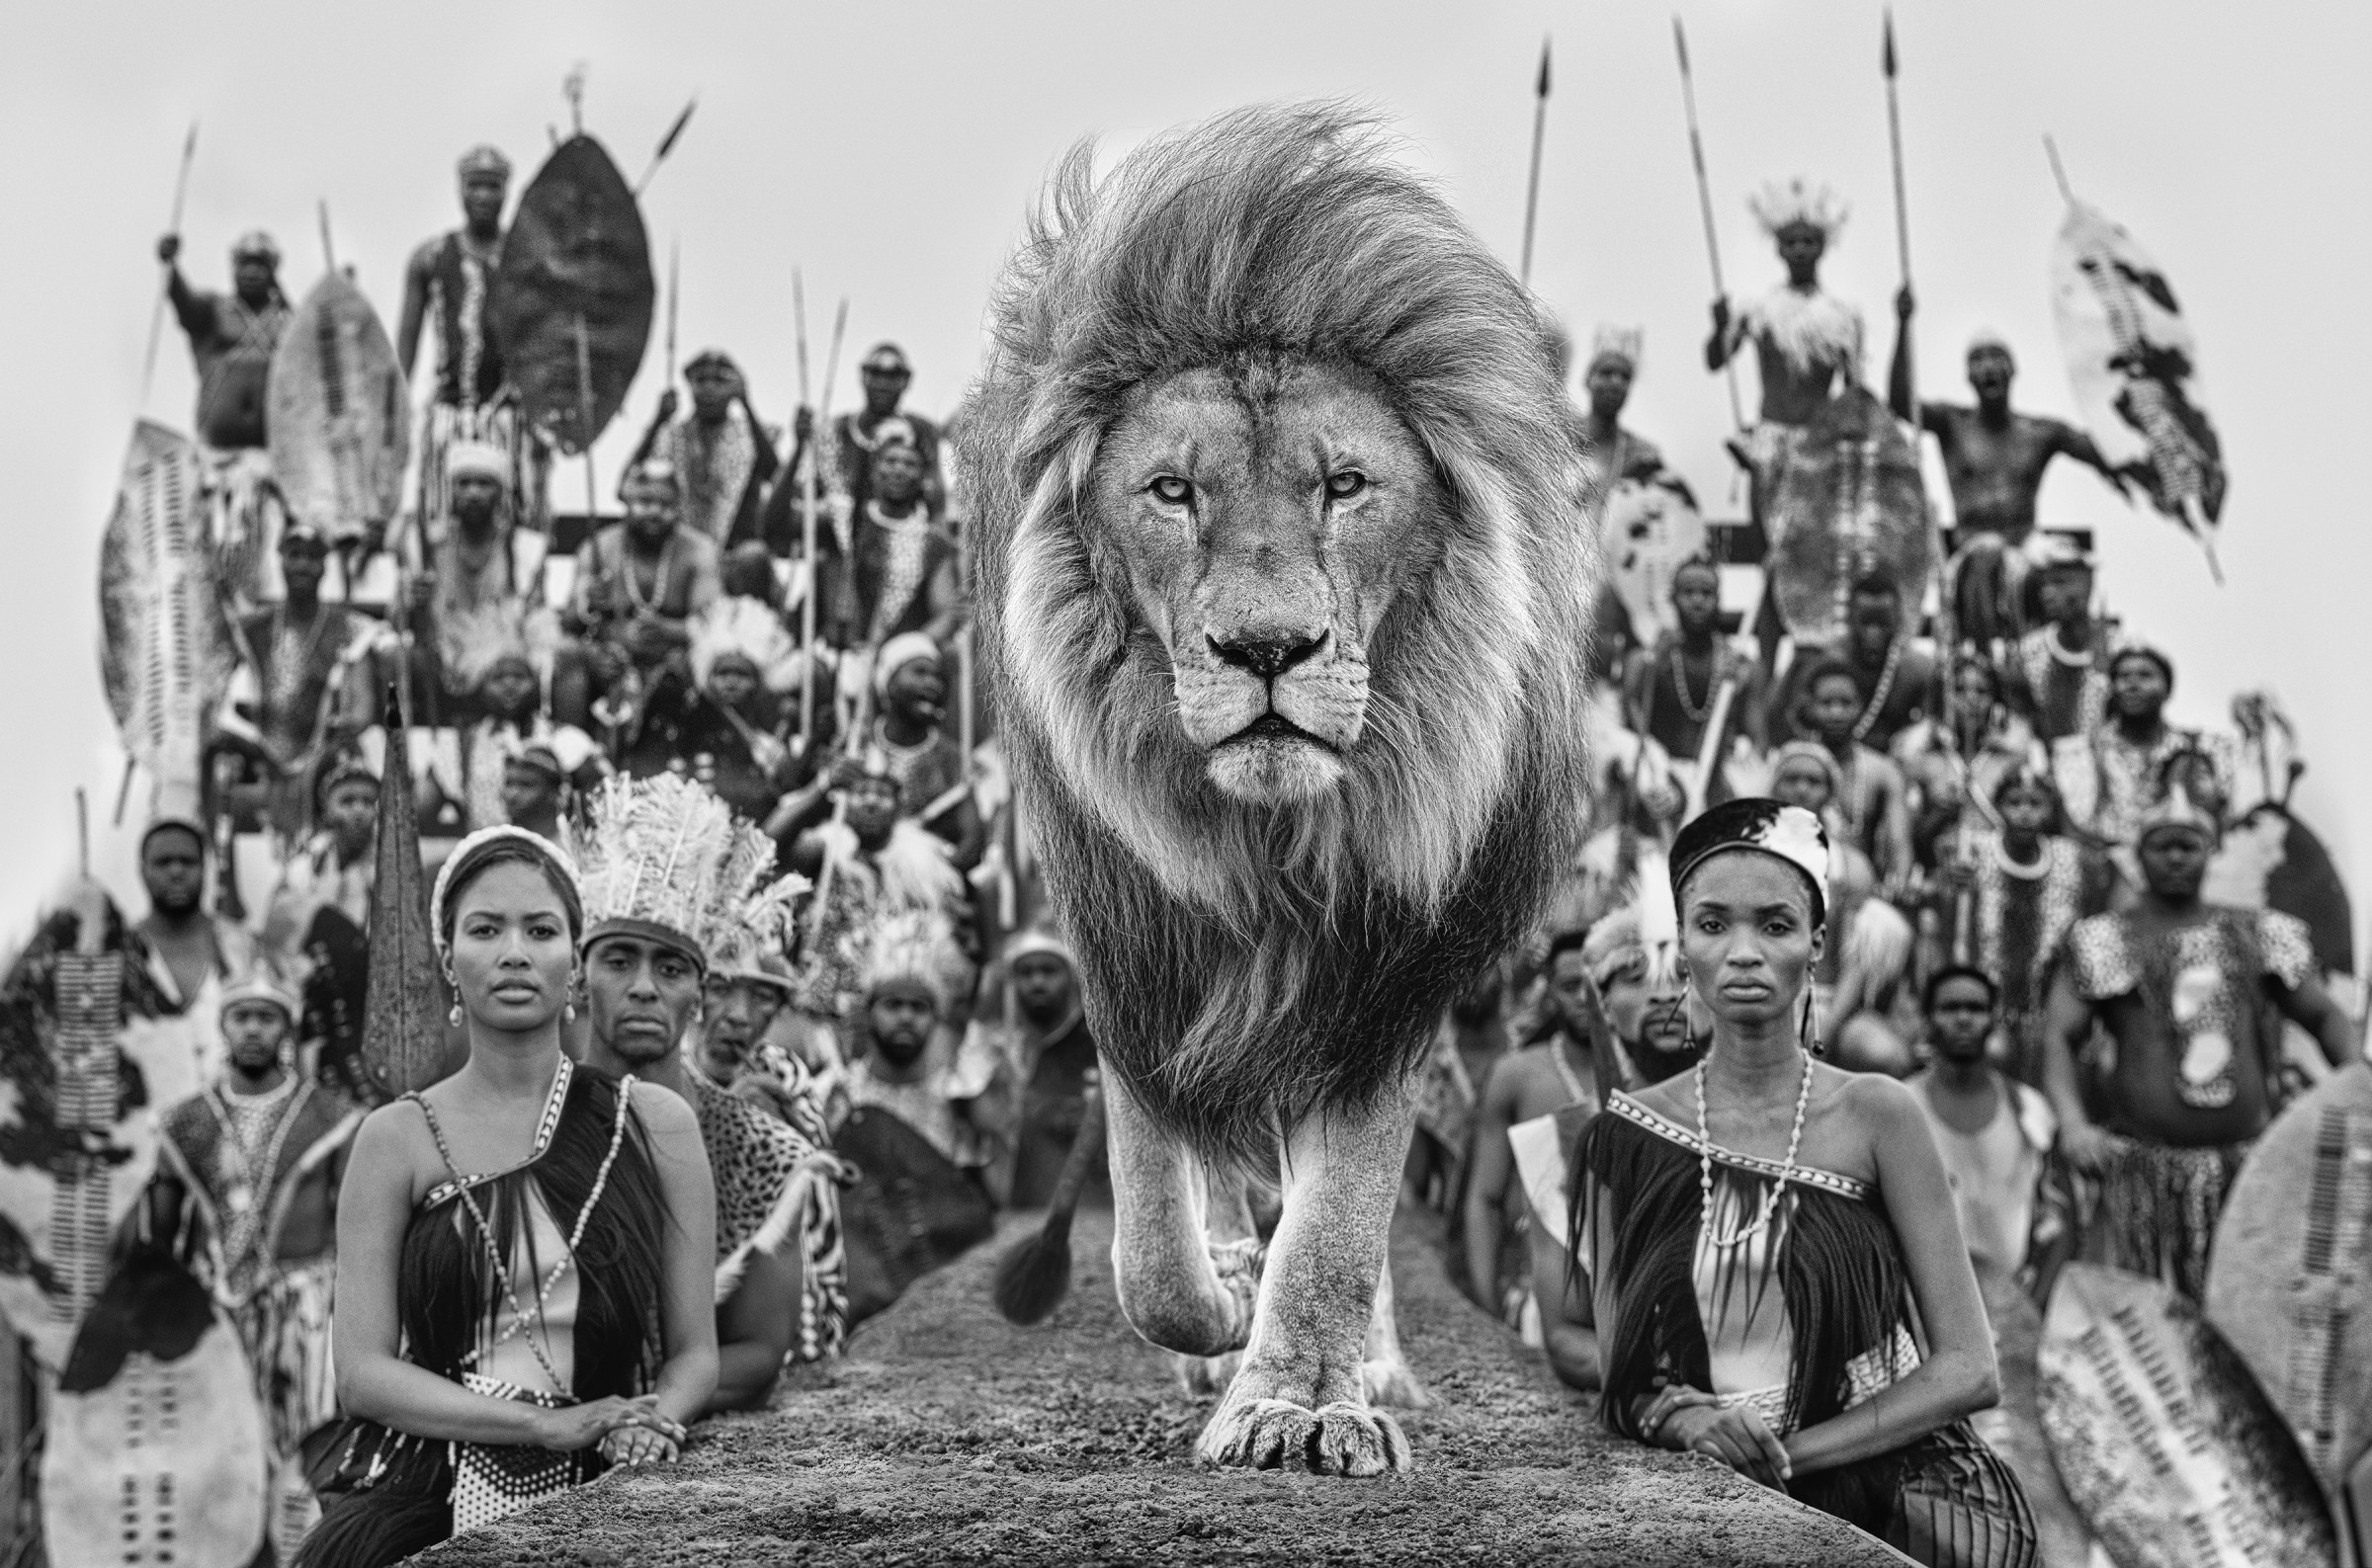 Take A Walk On The Wild Side: Behind The Scenes of David Yarrow’s Latest Photograph, From the inspiring strength of...